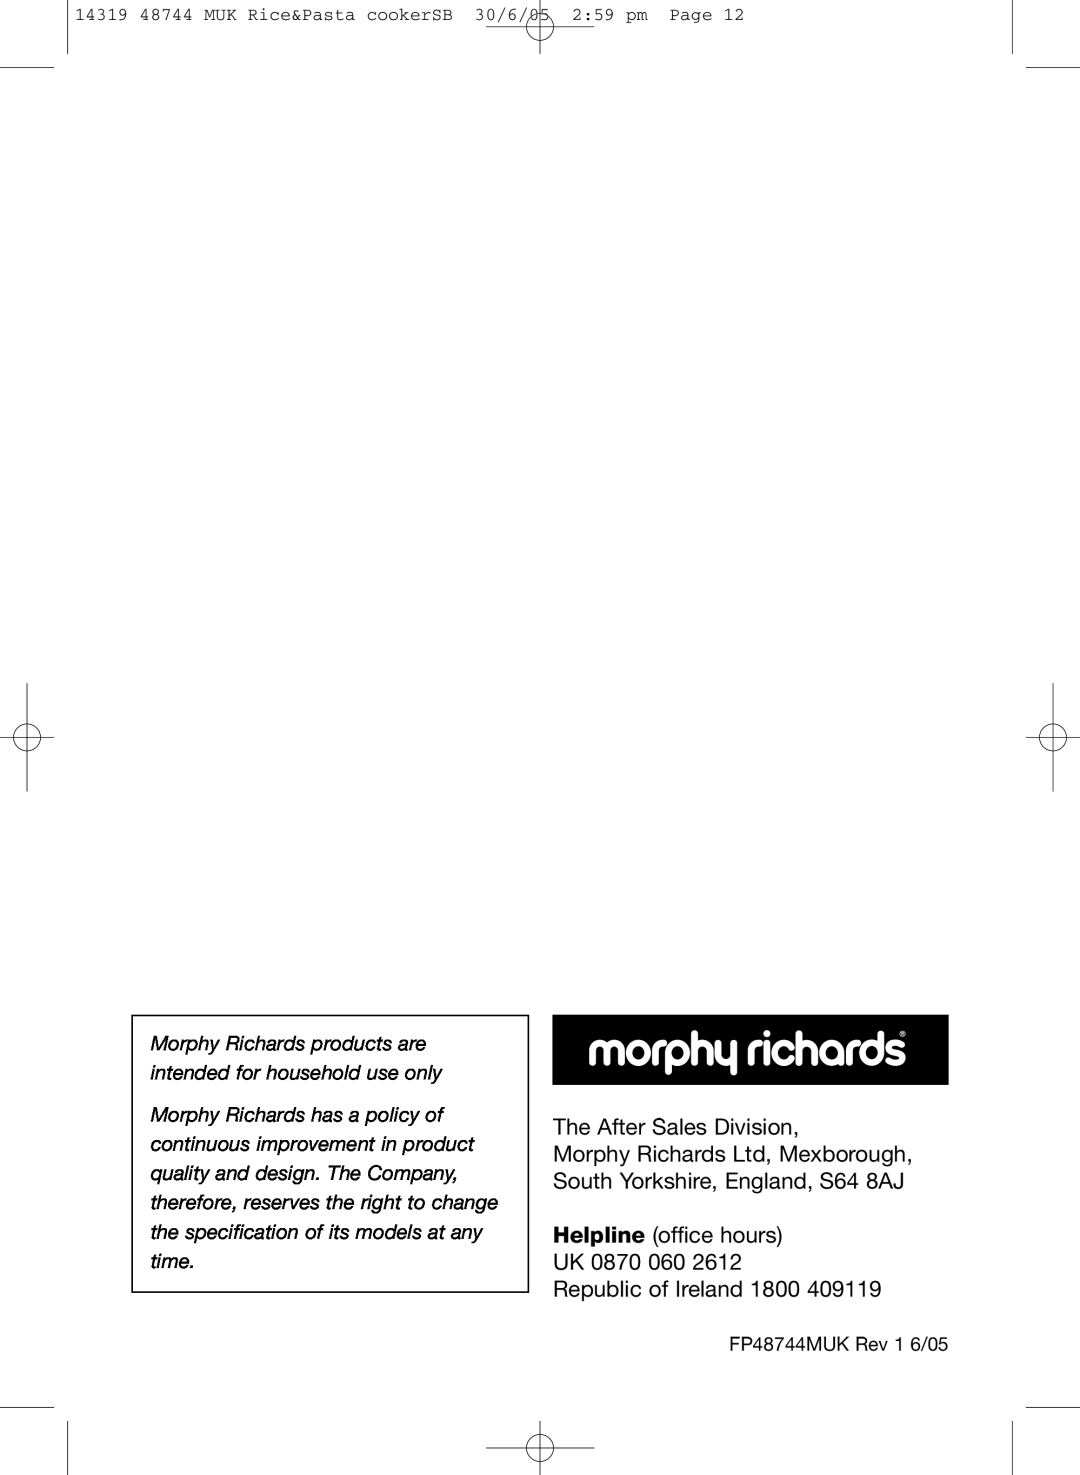 Morphy Richards cooker manual The After Sales Division, Helpline office hours UK 0870 060 Republic of Ireland 